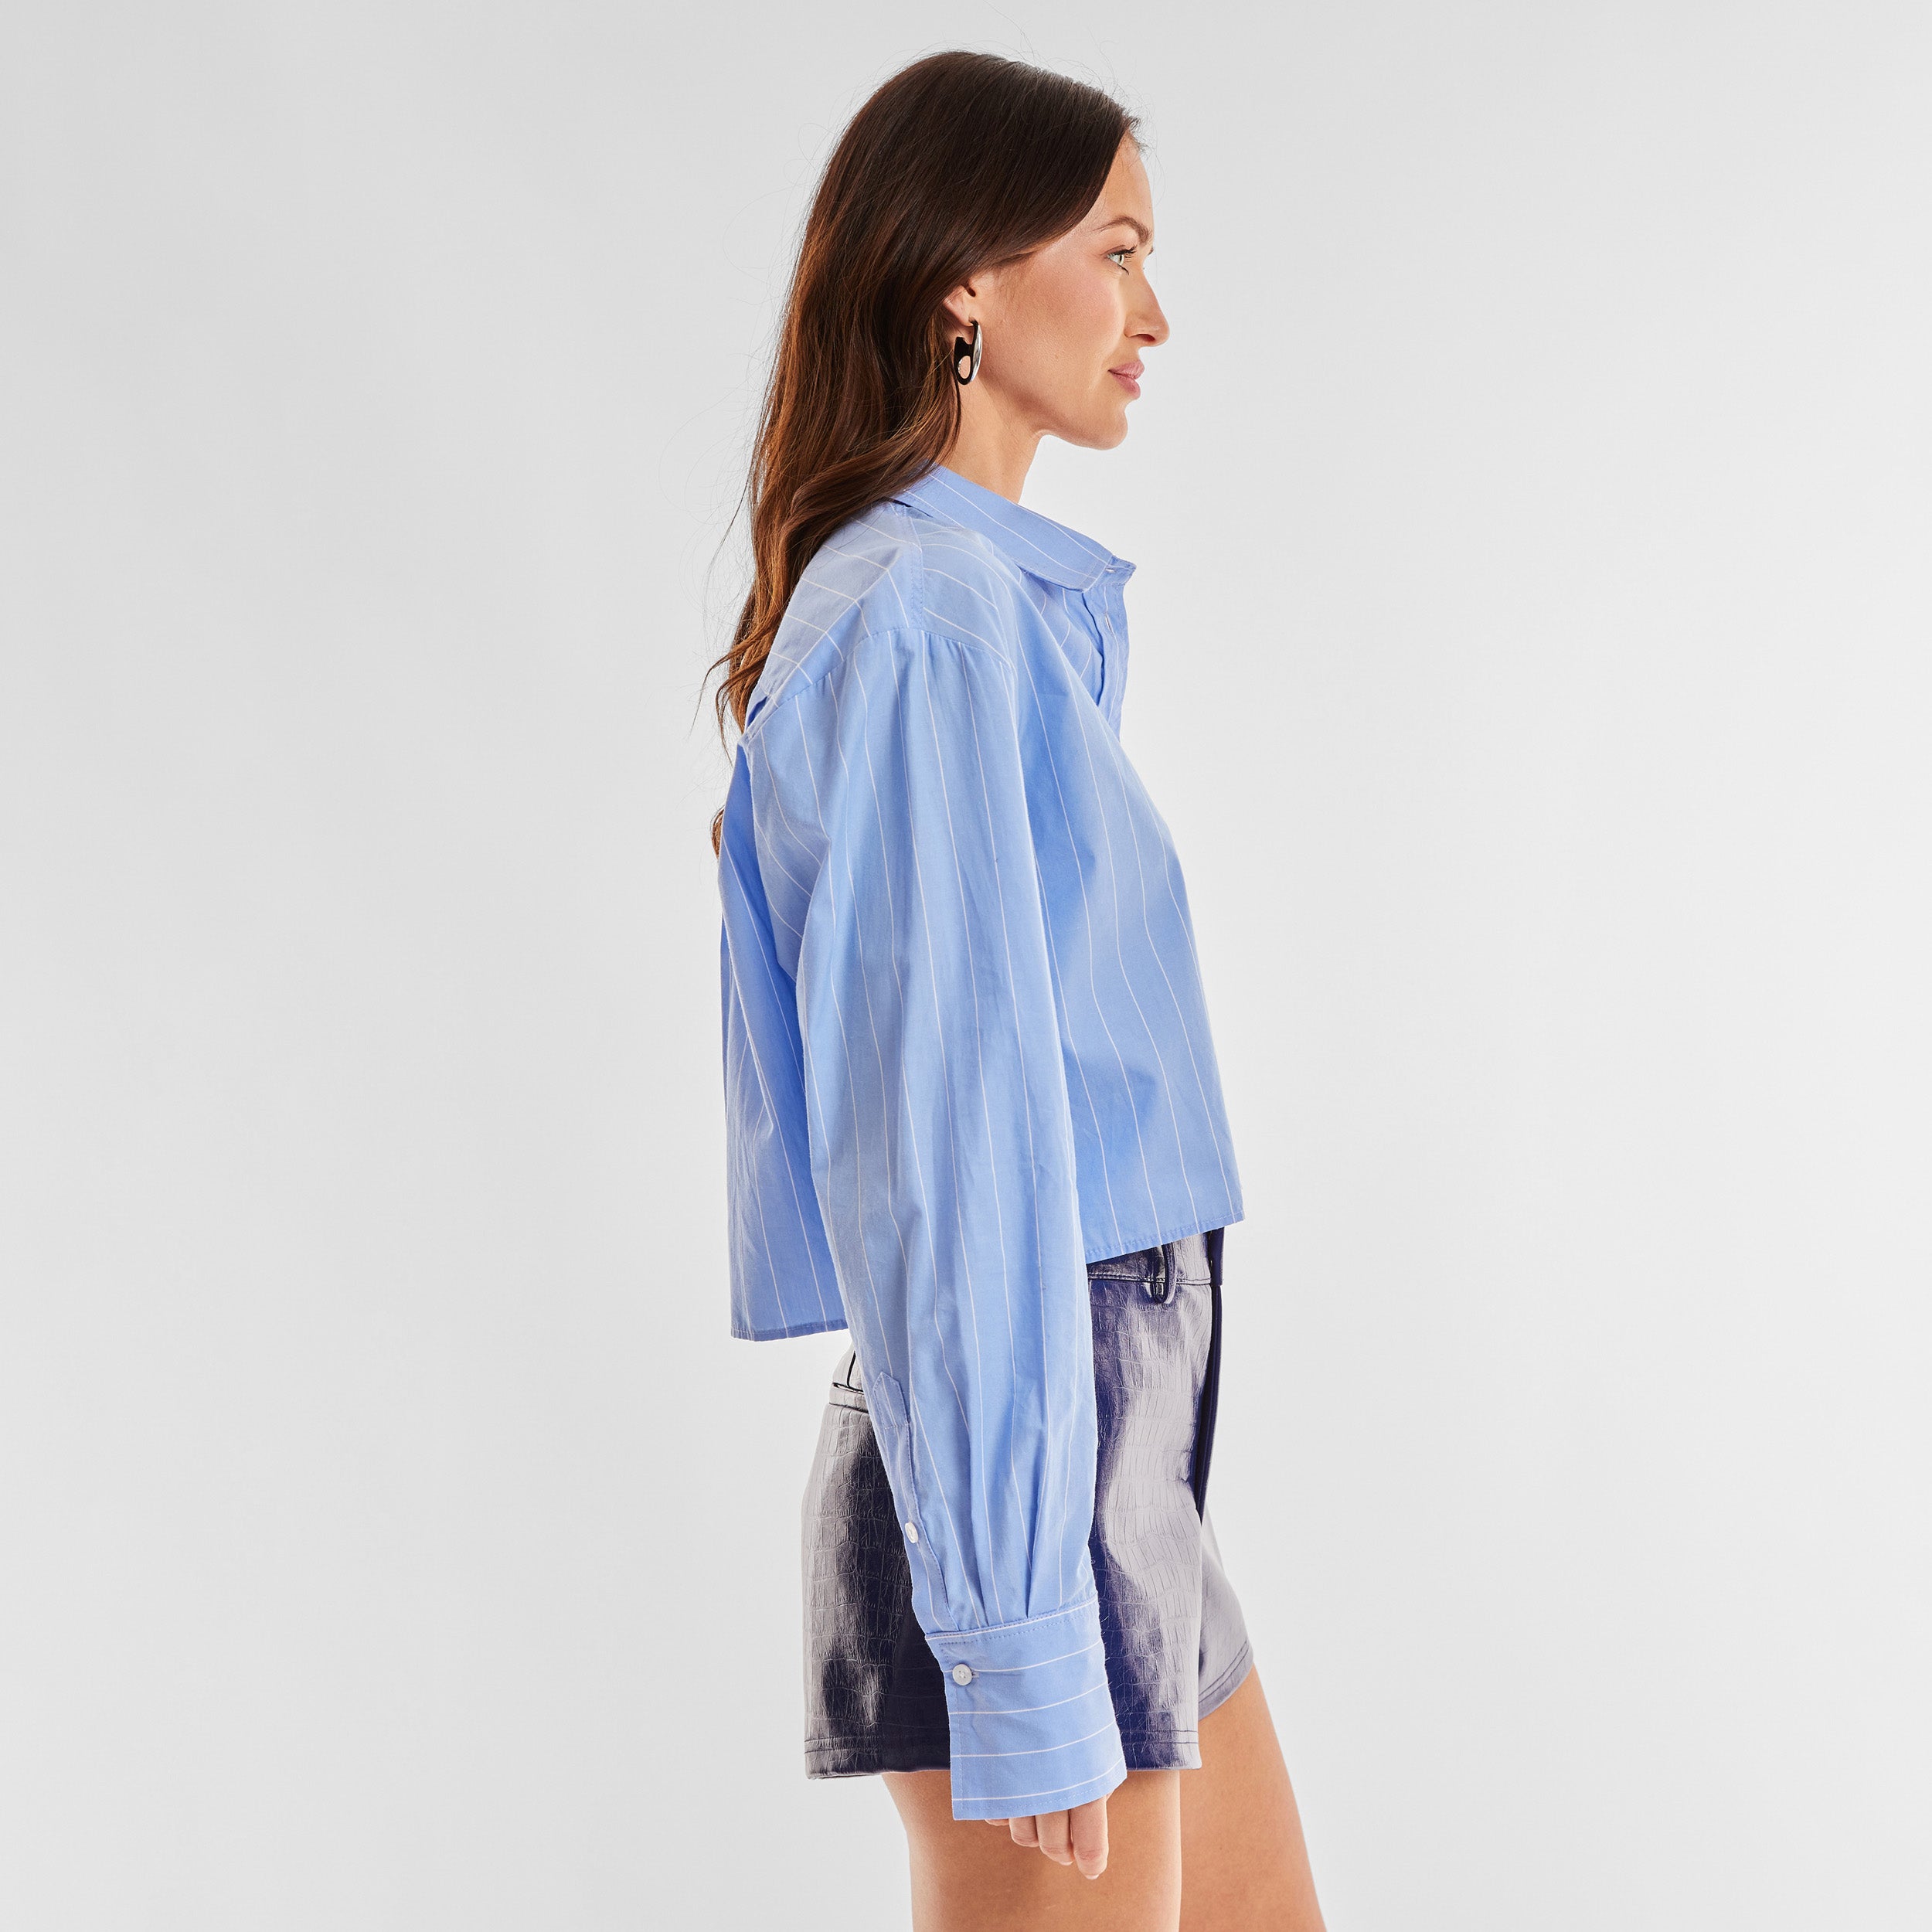 Side view of woman wearing a blue buttondown shirt with white stripes